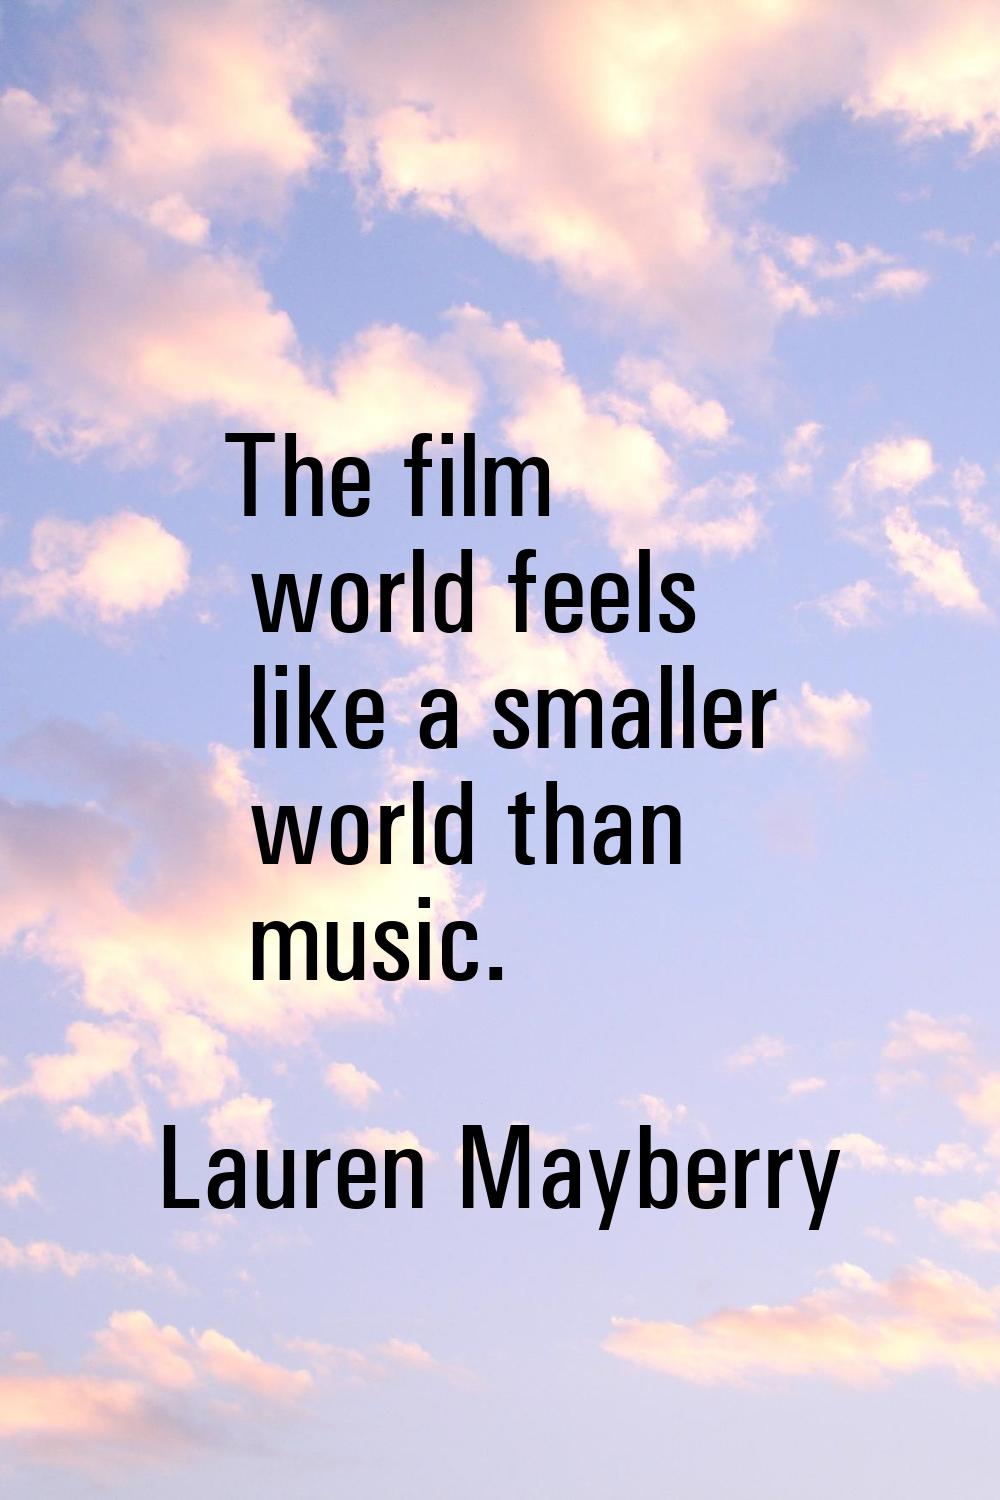 The film world feels like a smaller world than music.